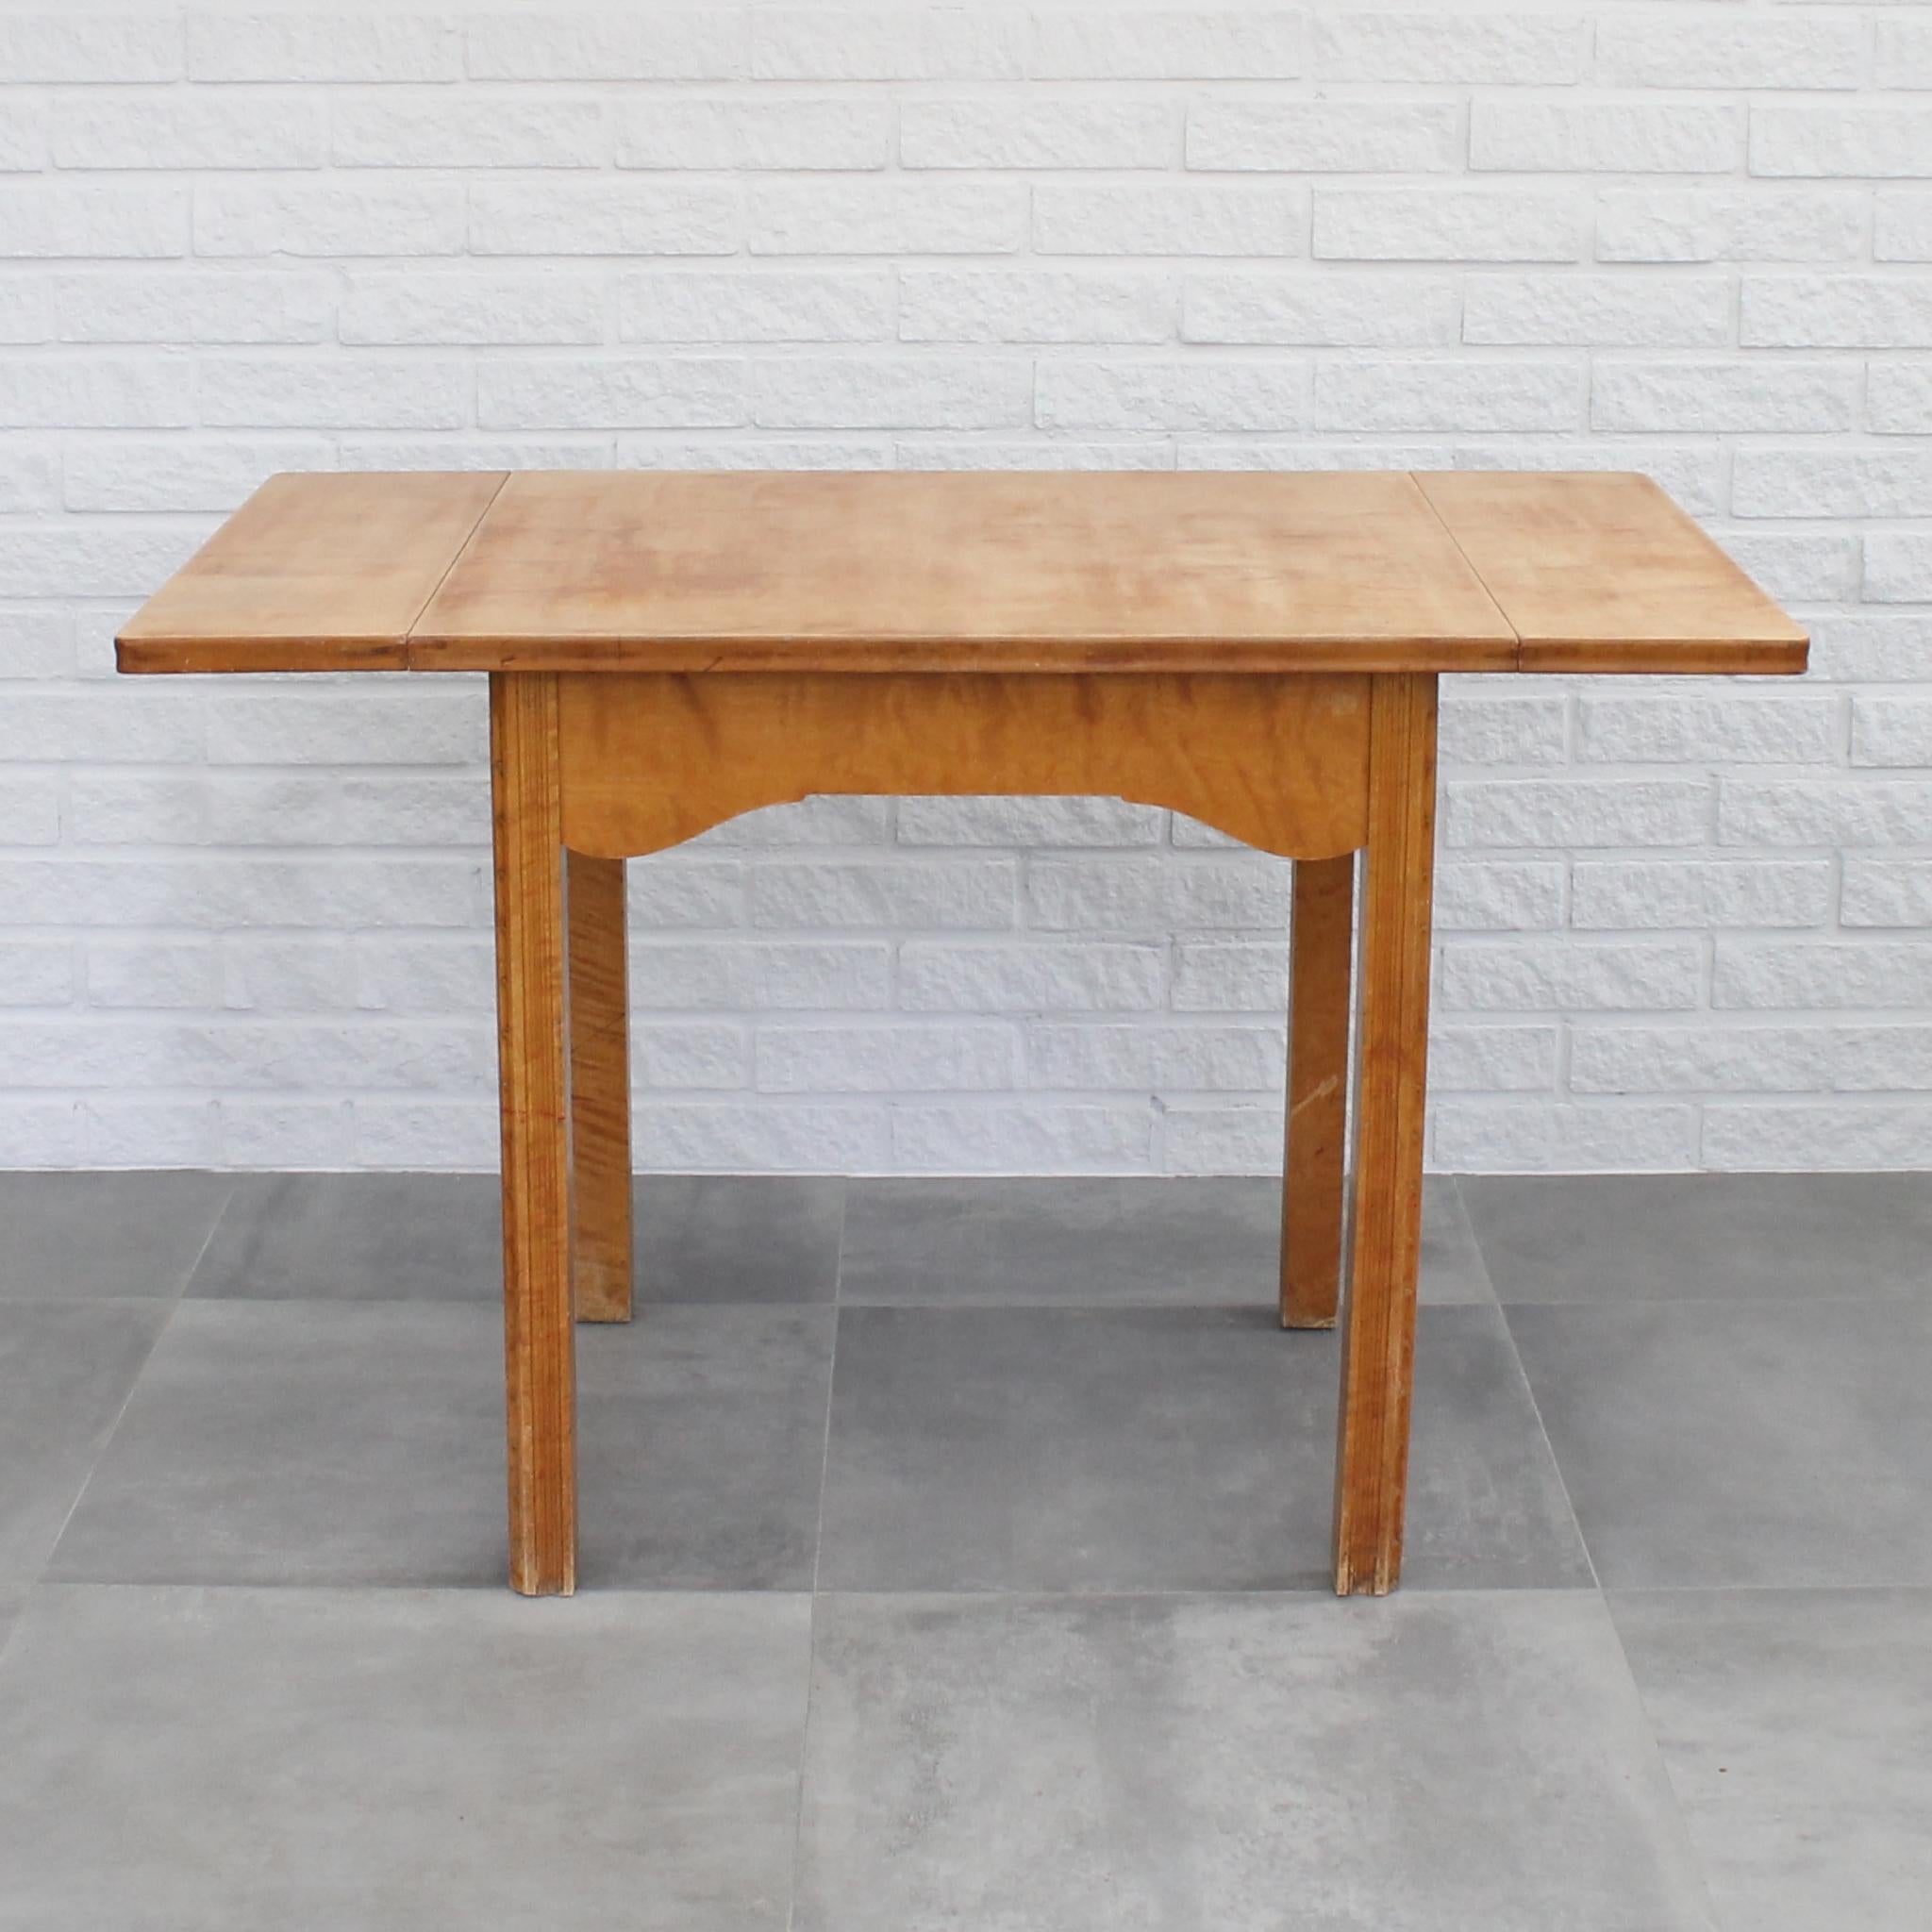 Swedish Art Nouveau dining table constructed from solid birch featuring adjustable sizing with a flap on each side of the table top. Produced in 1912 by Nordiska Kompaniet for the Gasworks of Stockholm and their main offices, which were designed by